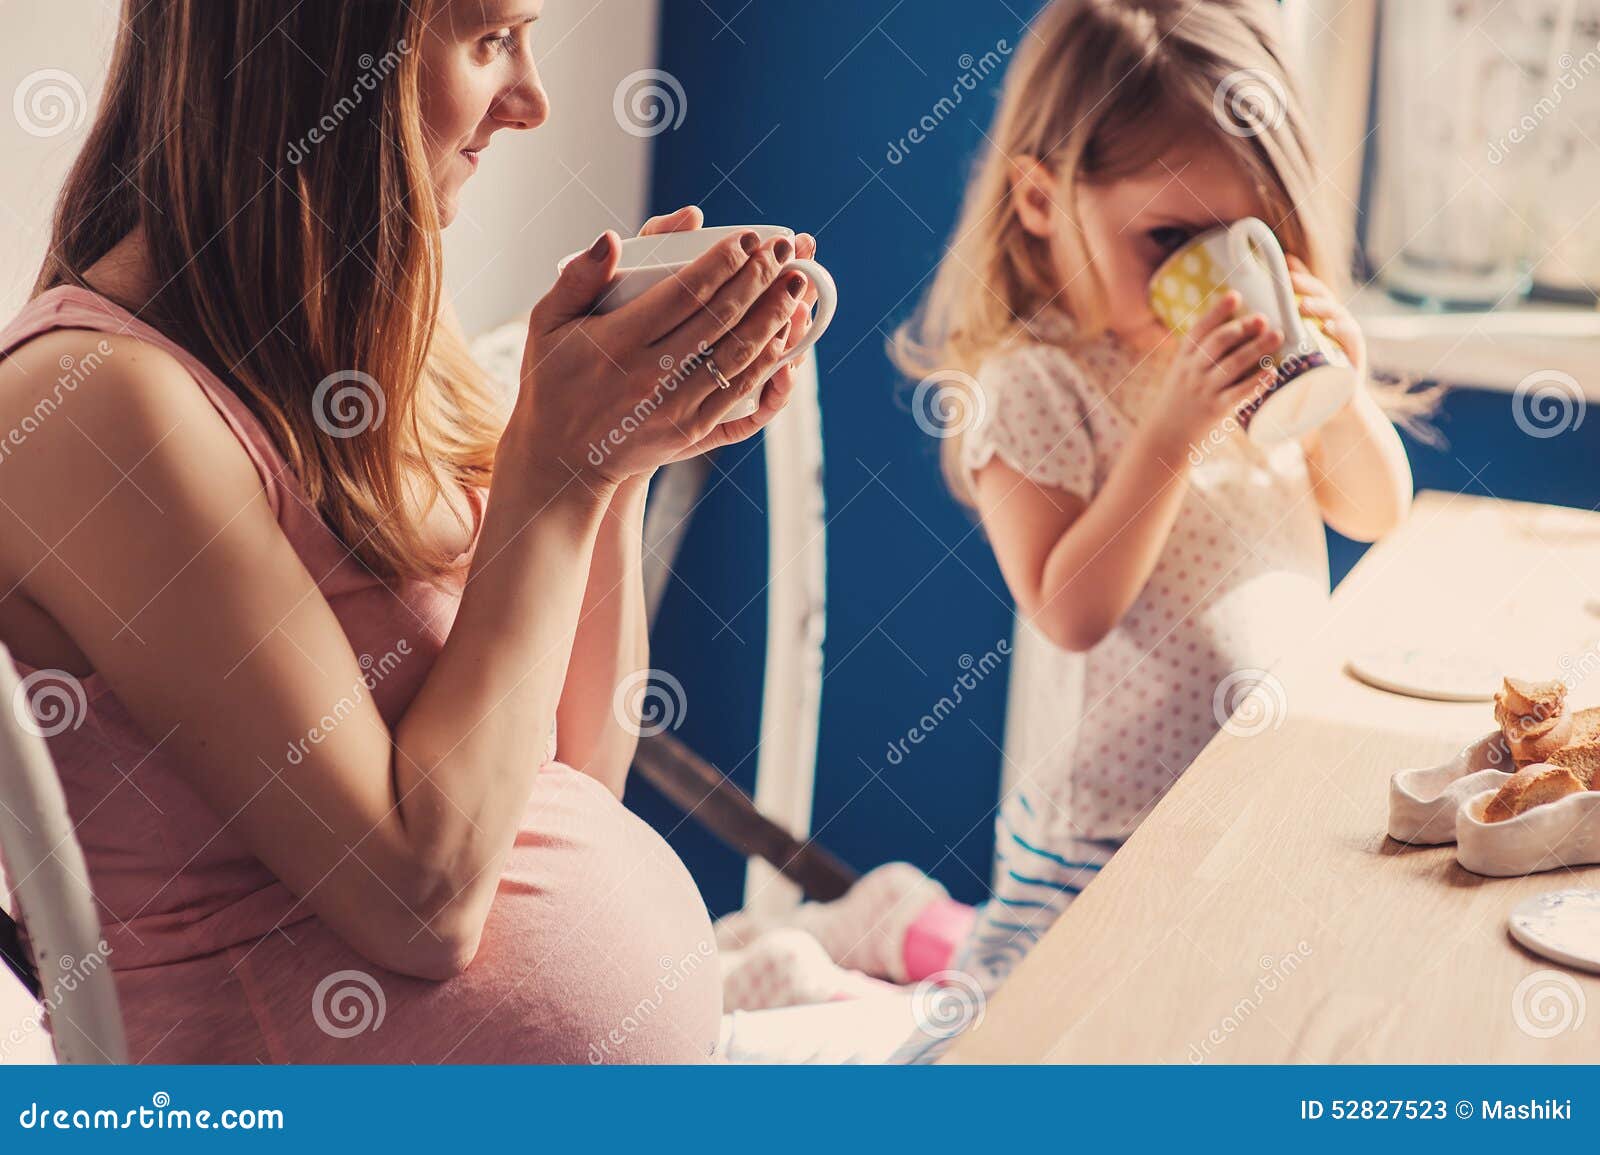 lifestyle capture of pregnant mother and baby girl having breakfast and drinking tea at home